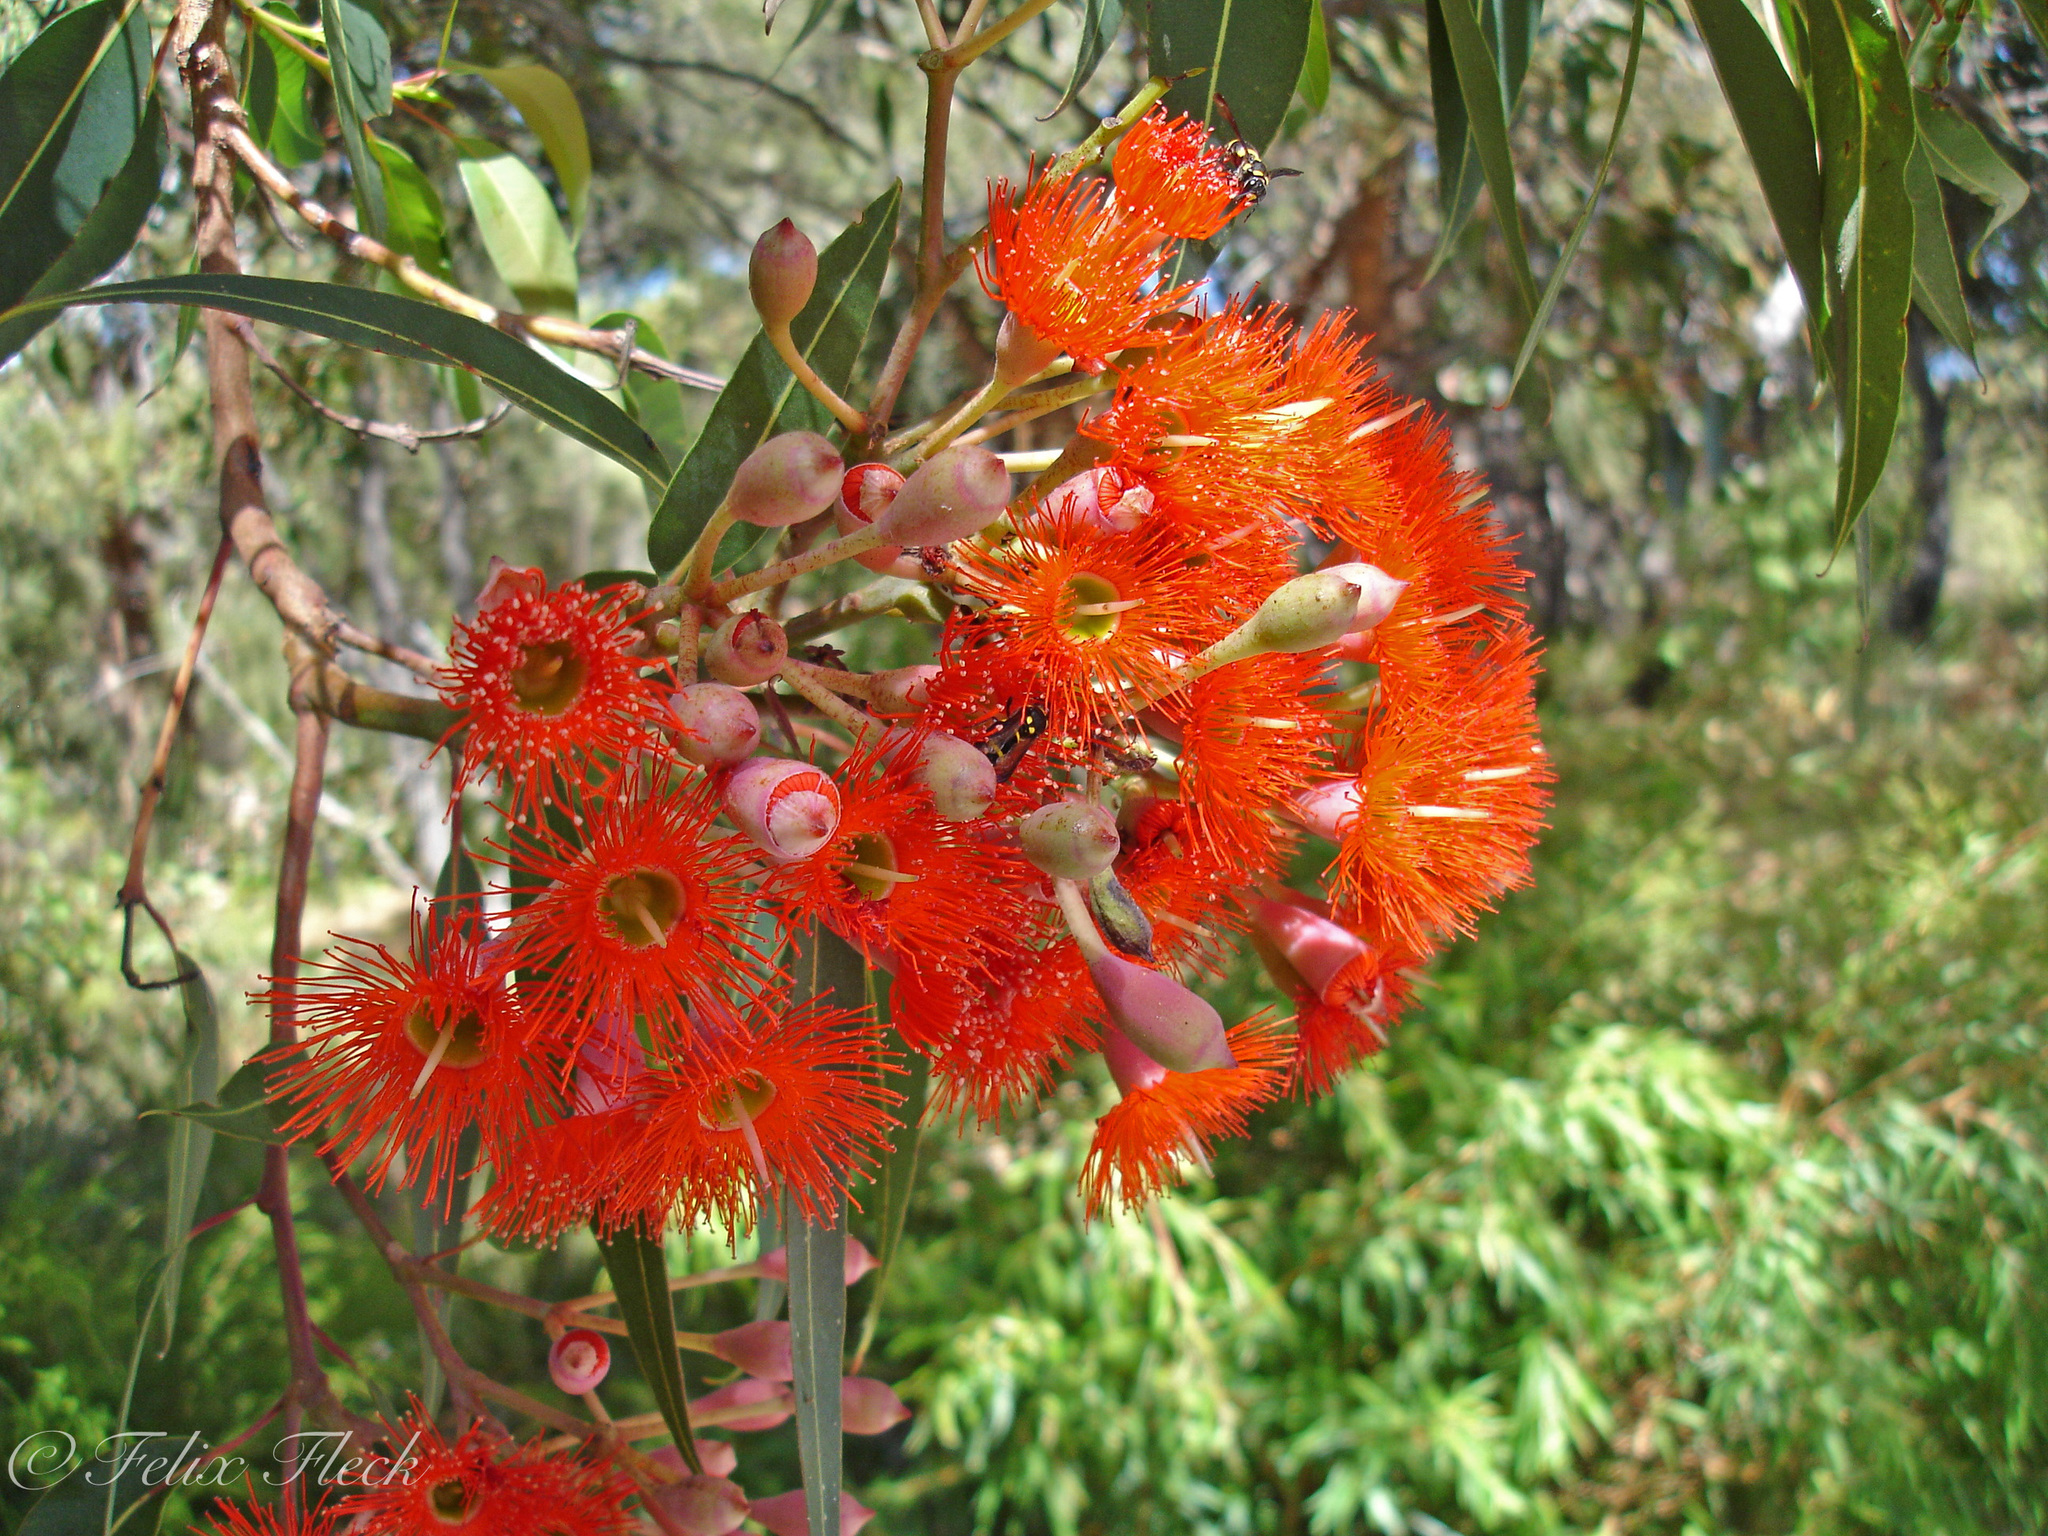 When your flowering gum flowers are done it is a good idea to trim